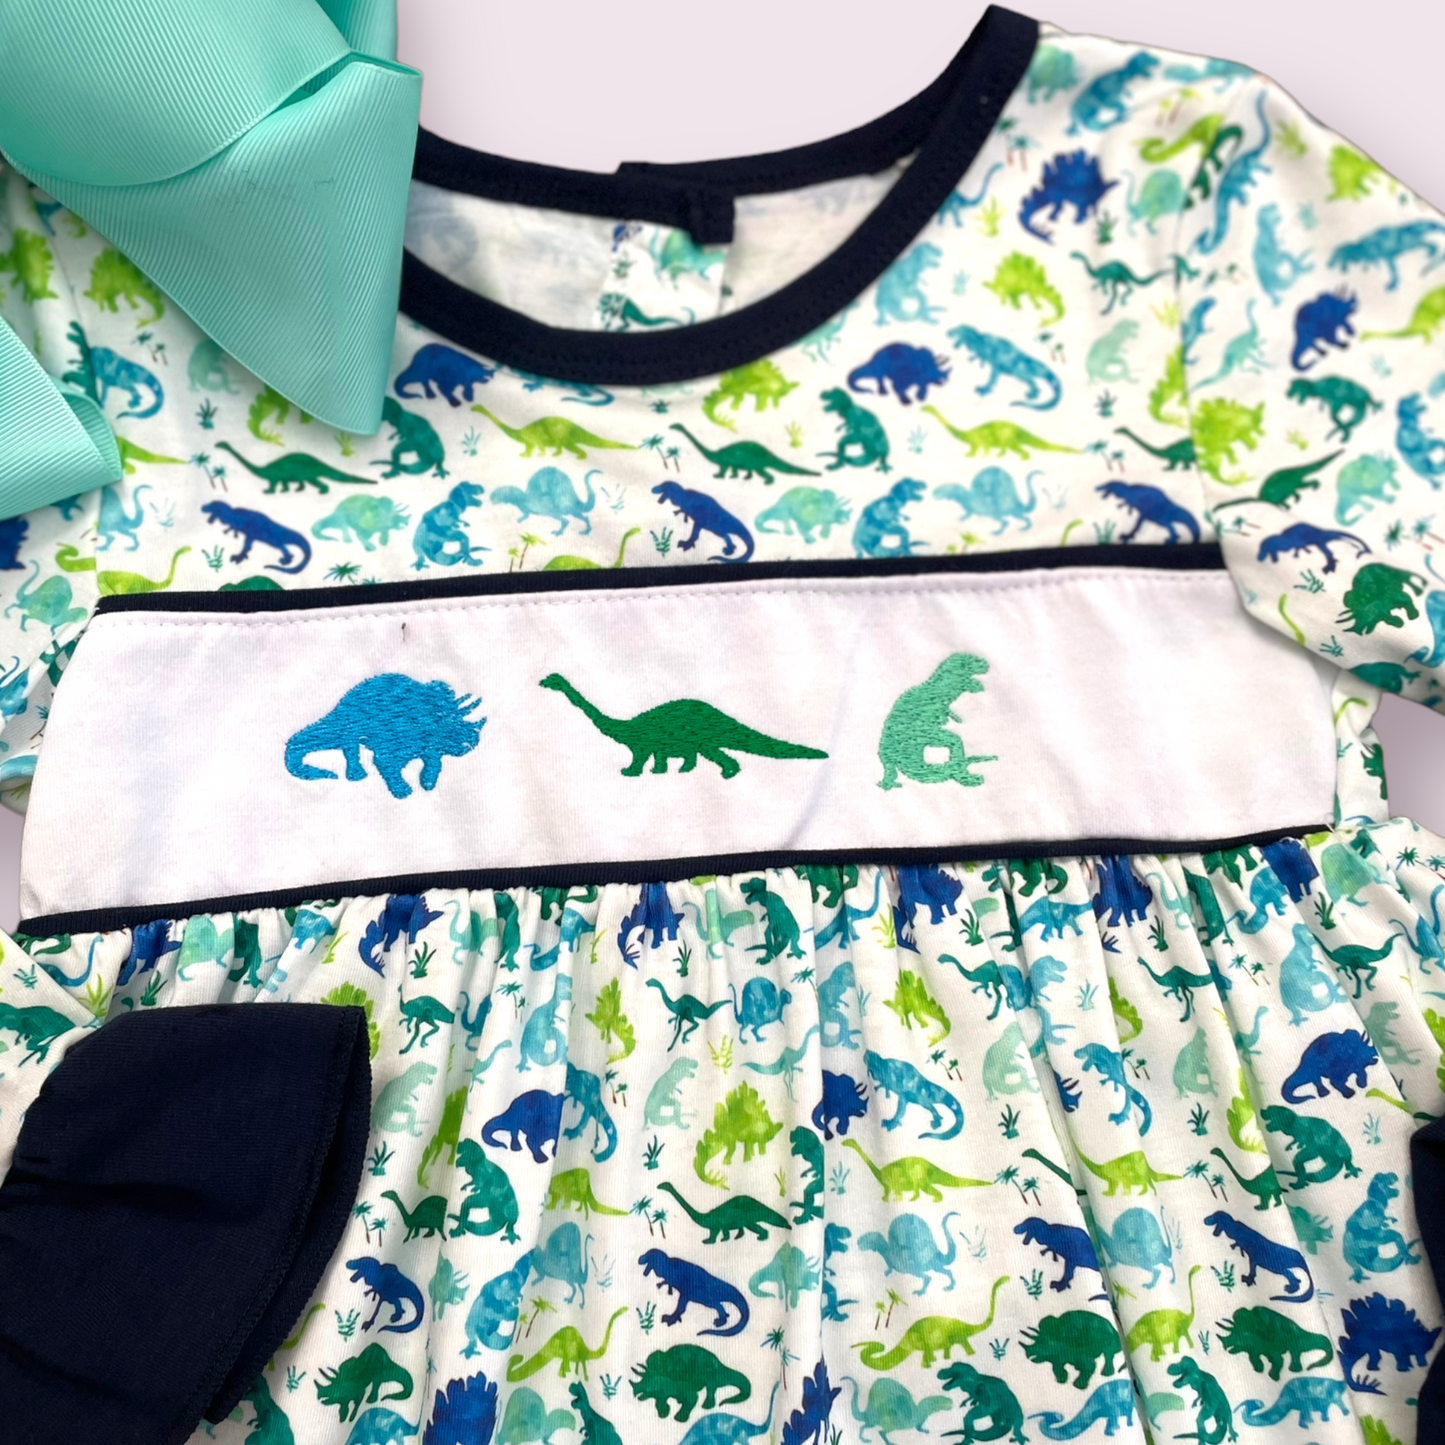 Embroidered Dinosaur Outfit